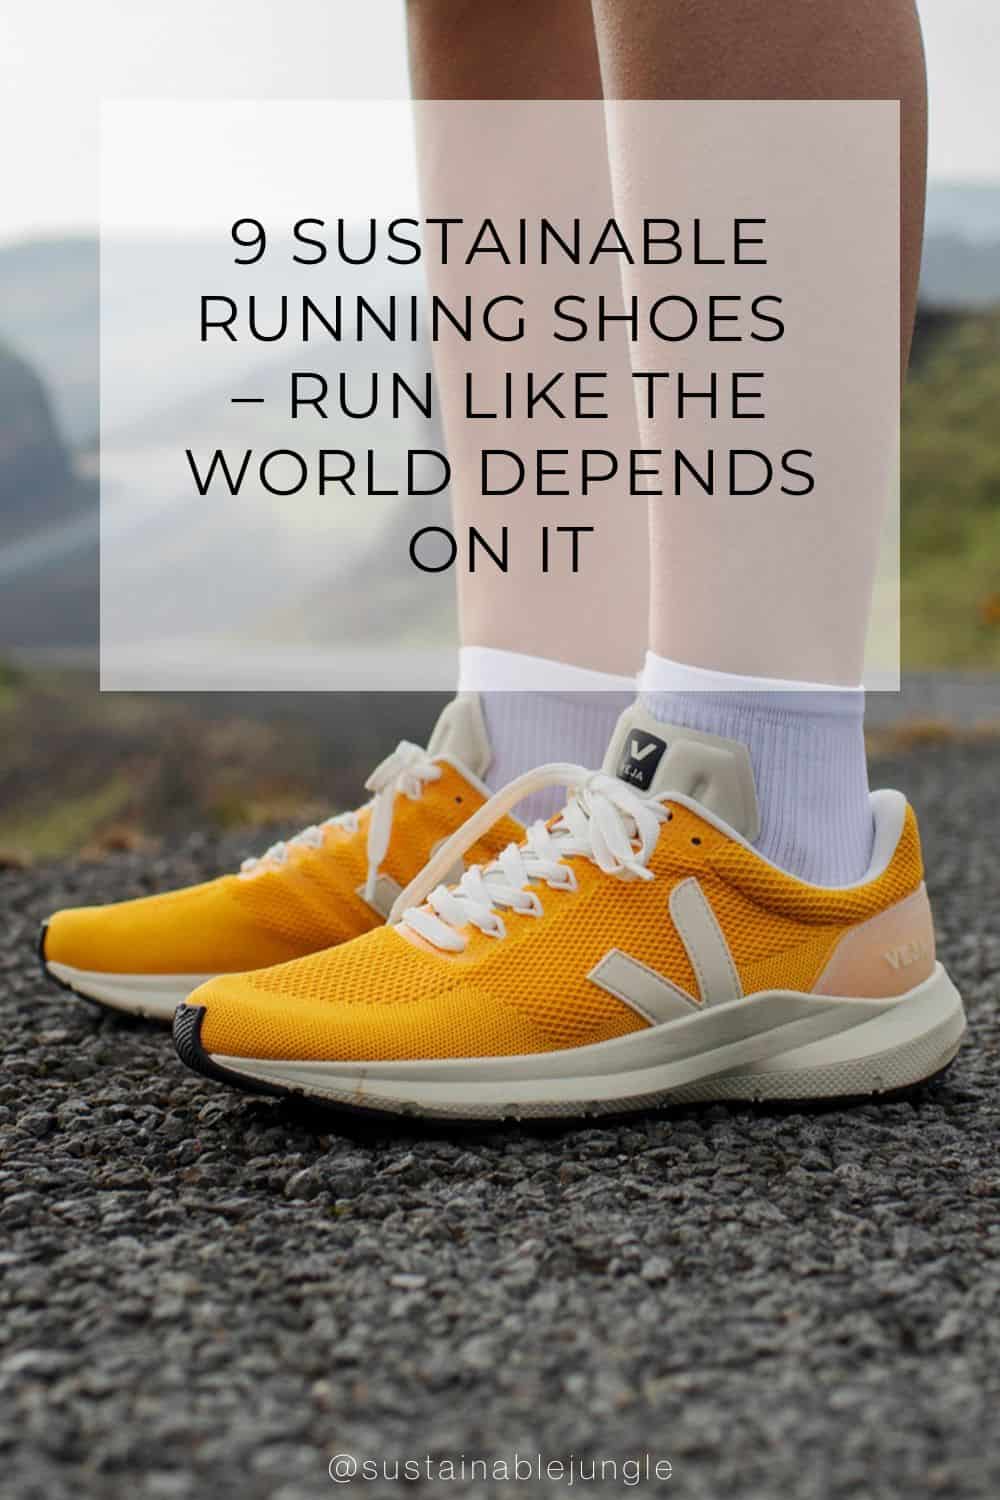 9 Sustainable Running Shoes – Run Like The World Depends On It Image by VEJA #sustainablerunningshoes #runningshoessustainable #bestsustainablerunningshoes #recycledrunningshoes #recycledplasticrunningshoes #sustainabletrailrunningshoes #sustainablejungle